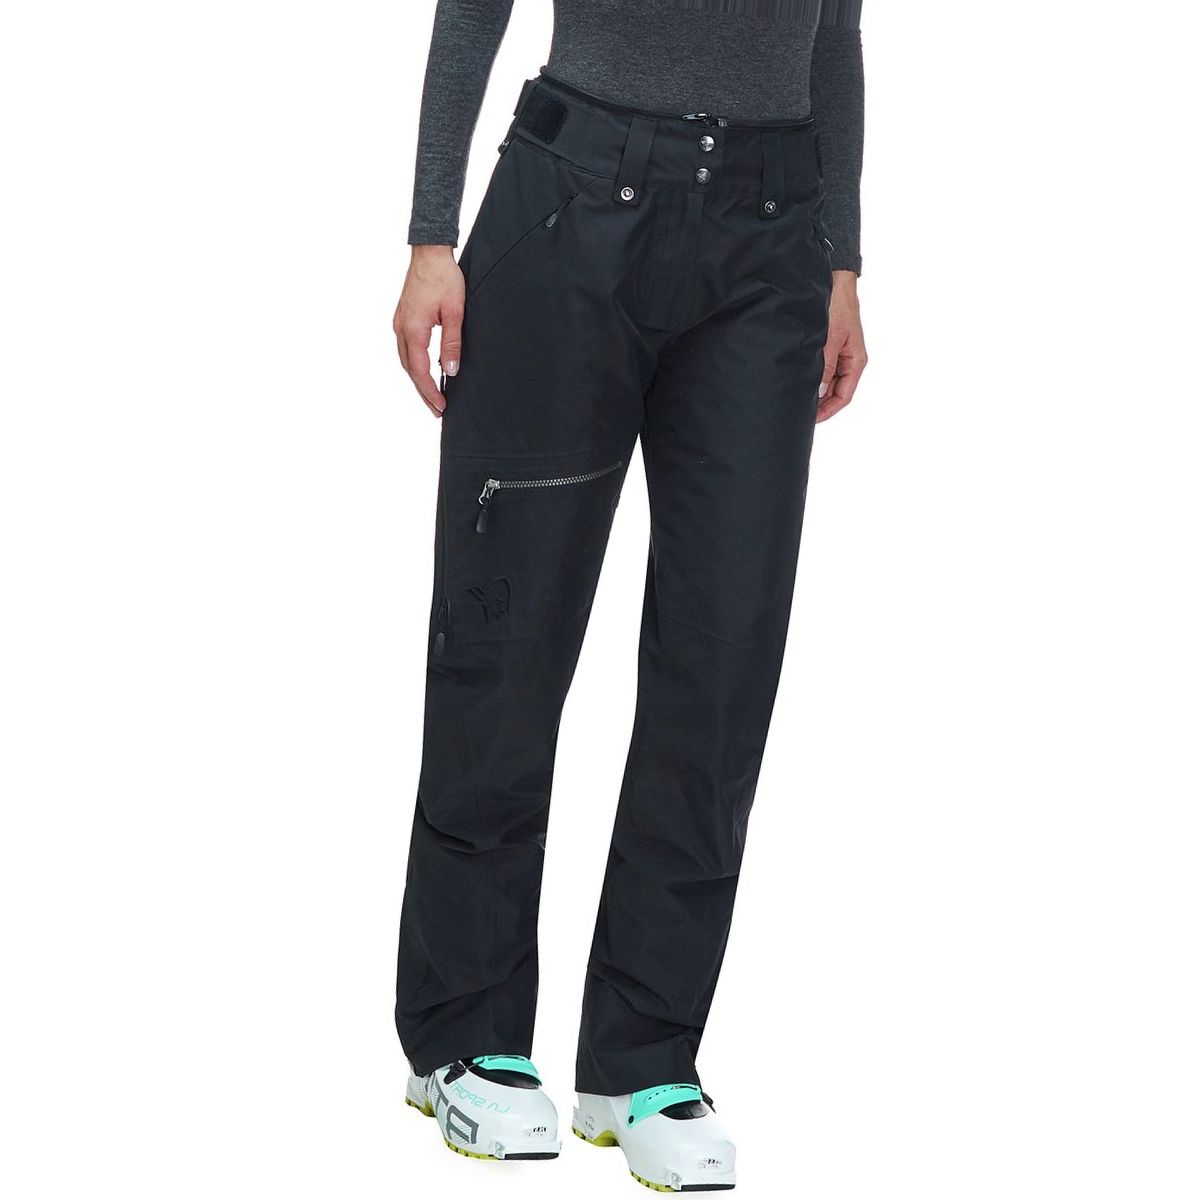 Norrona Roldal Gore-Tex Insulated Pant - Women's